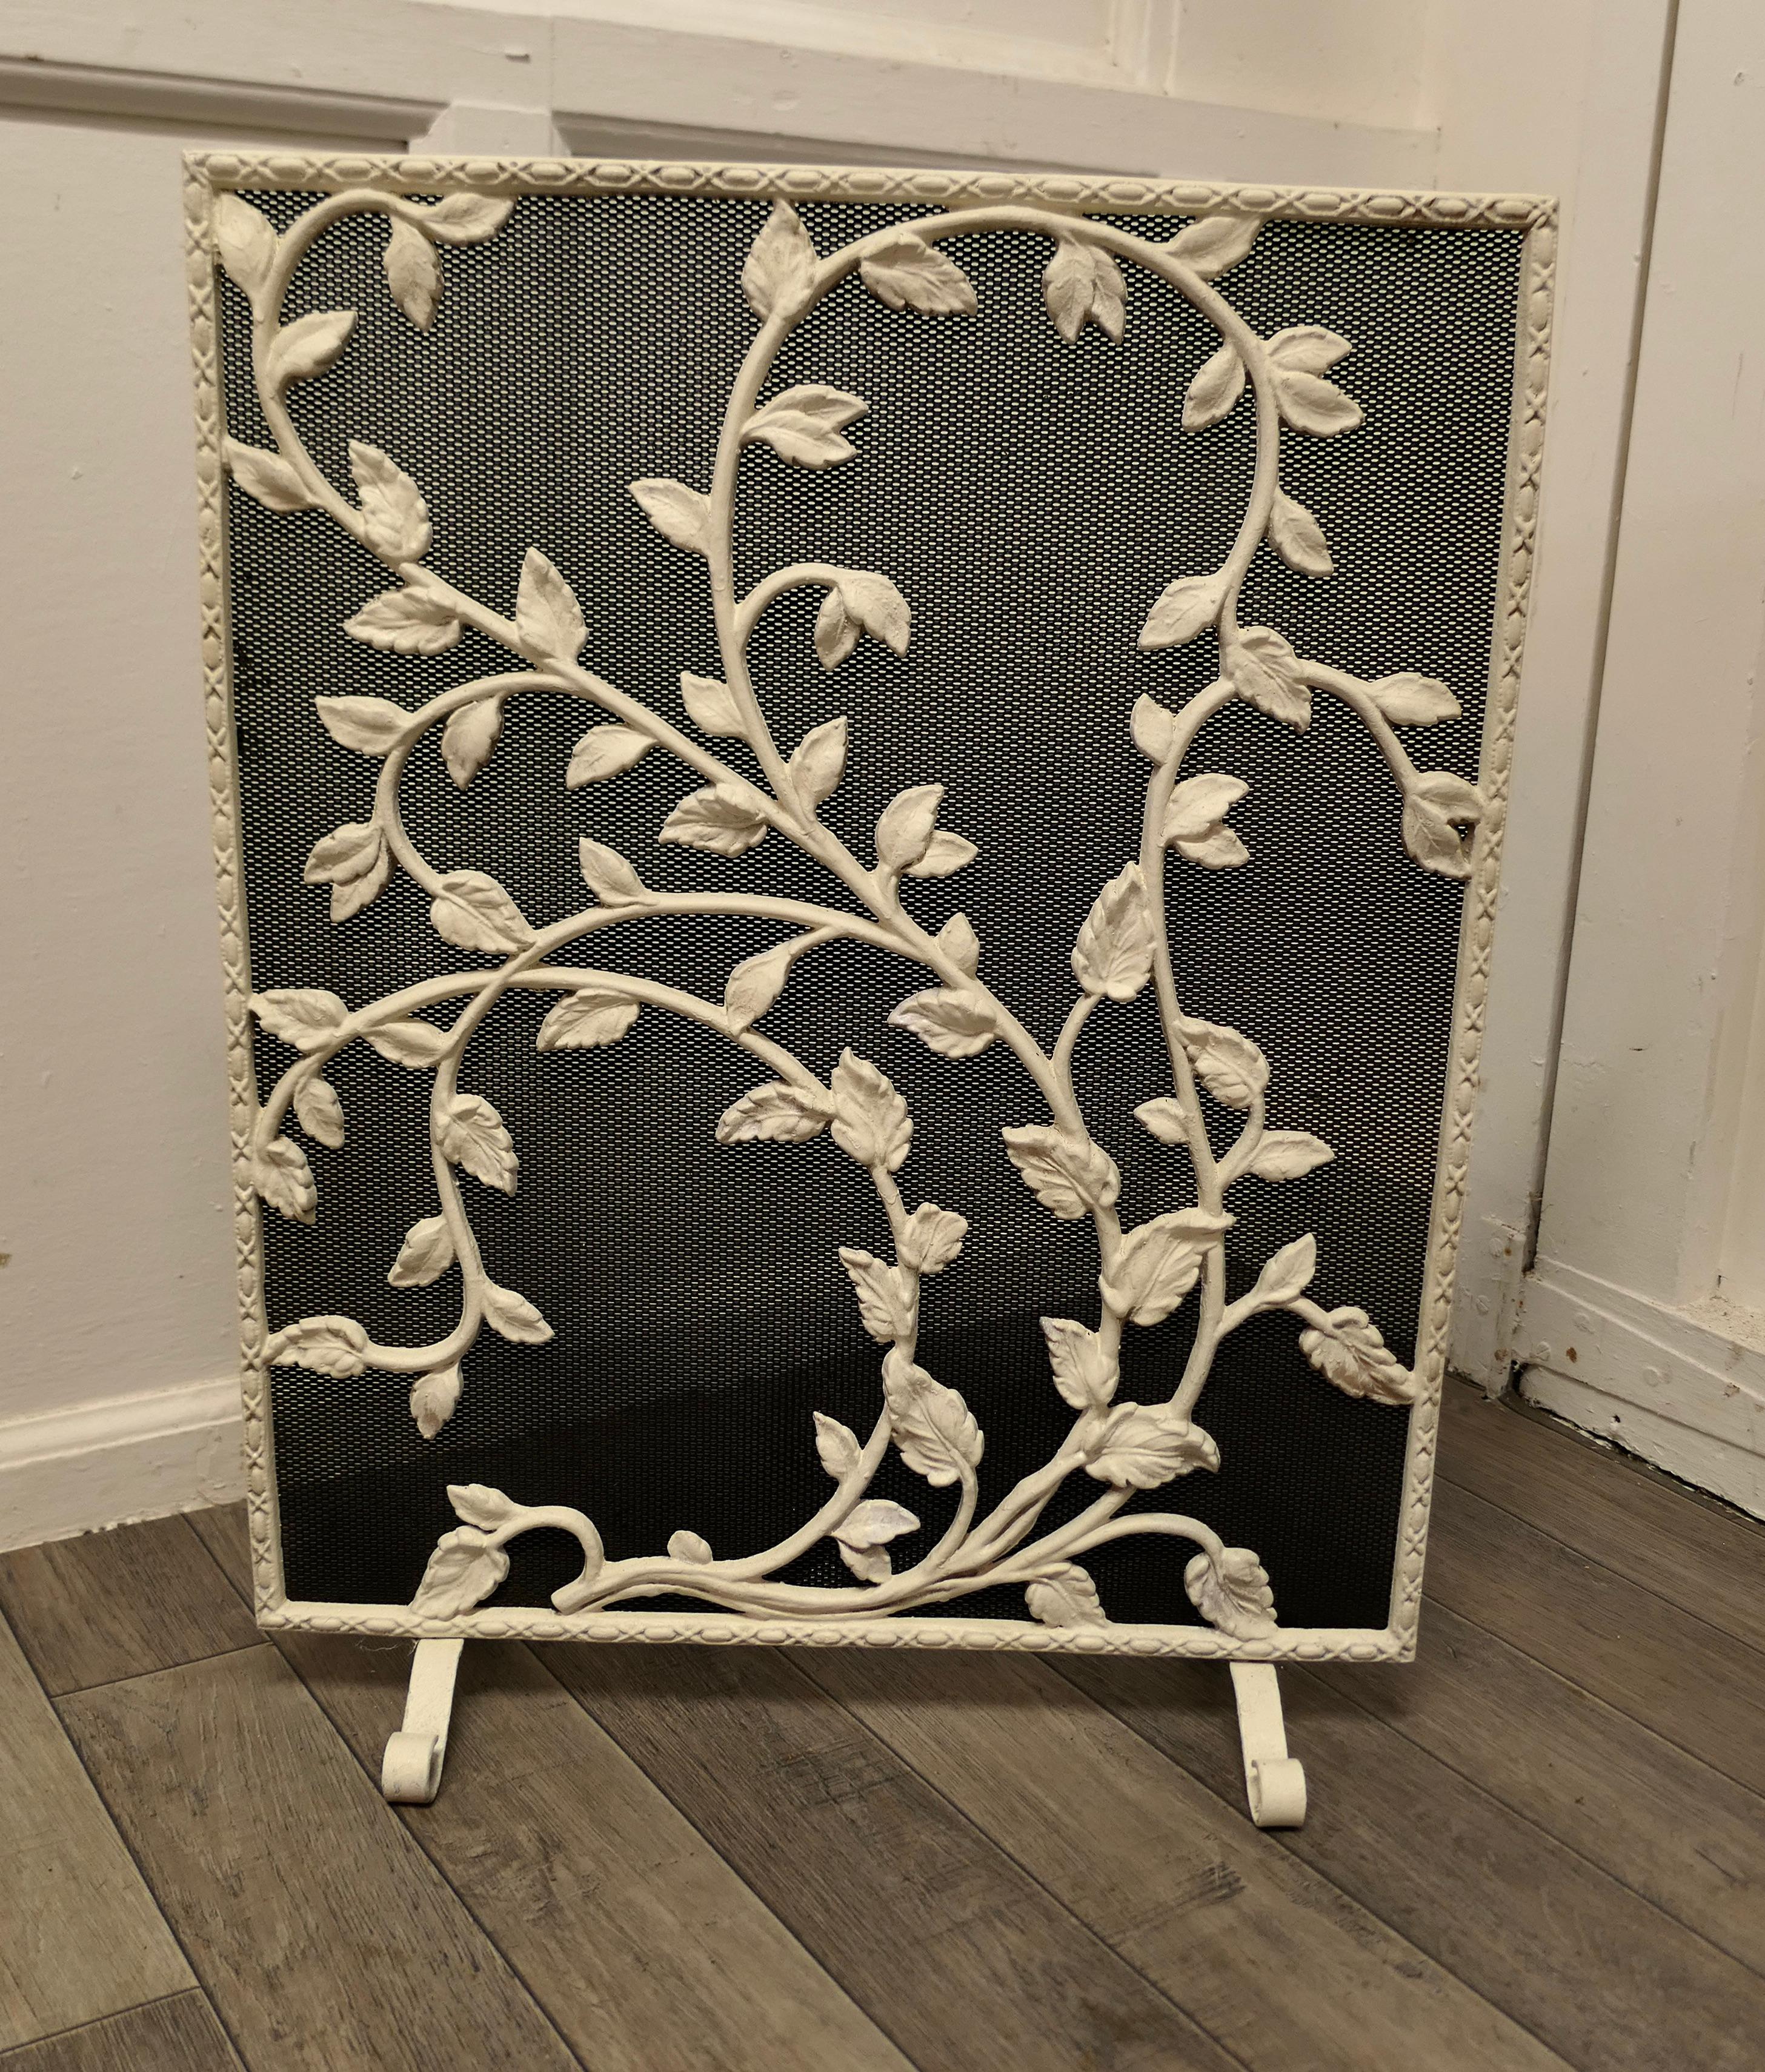 Painted wrought iron fire guard decorated with leaves.

This is a good Fireguard, it has a decorative wrought iron decoration over heavy inset mesh 
The guard is in good condition and very steady when in use
It is 26” high, 20” long 
TJK225